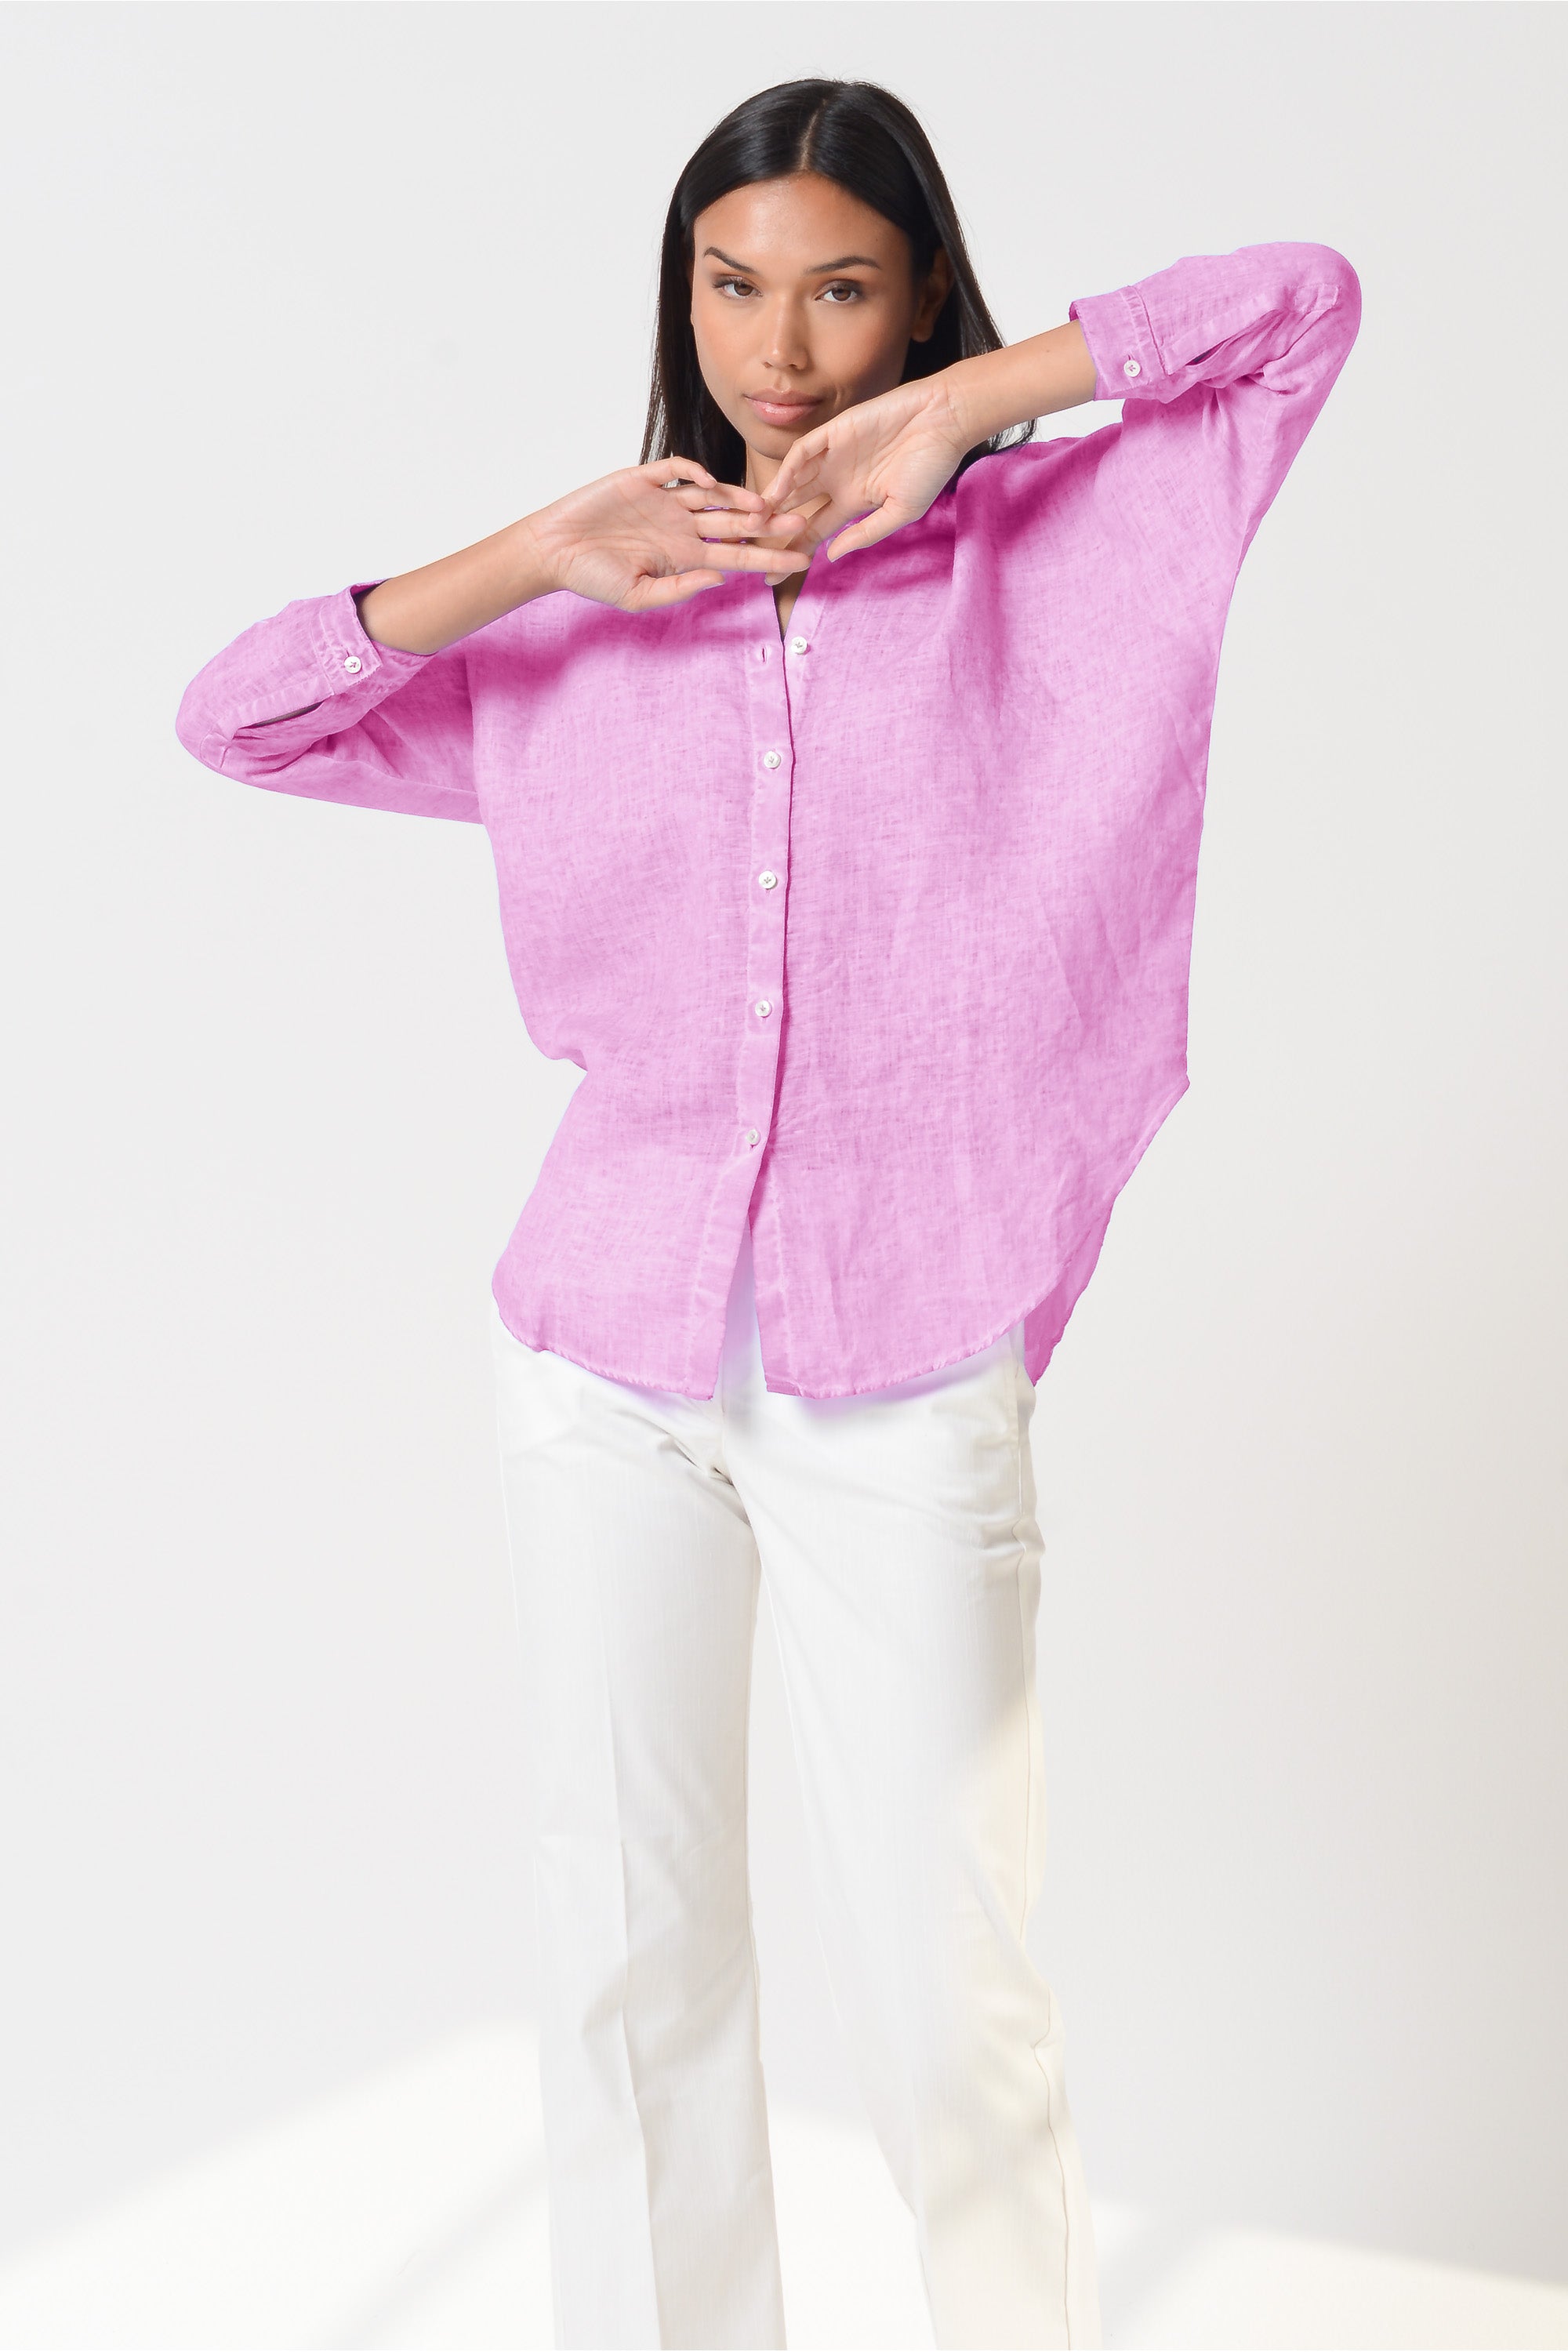 Ollie Blouse in Linen - Candy